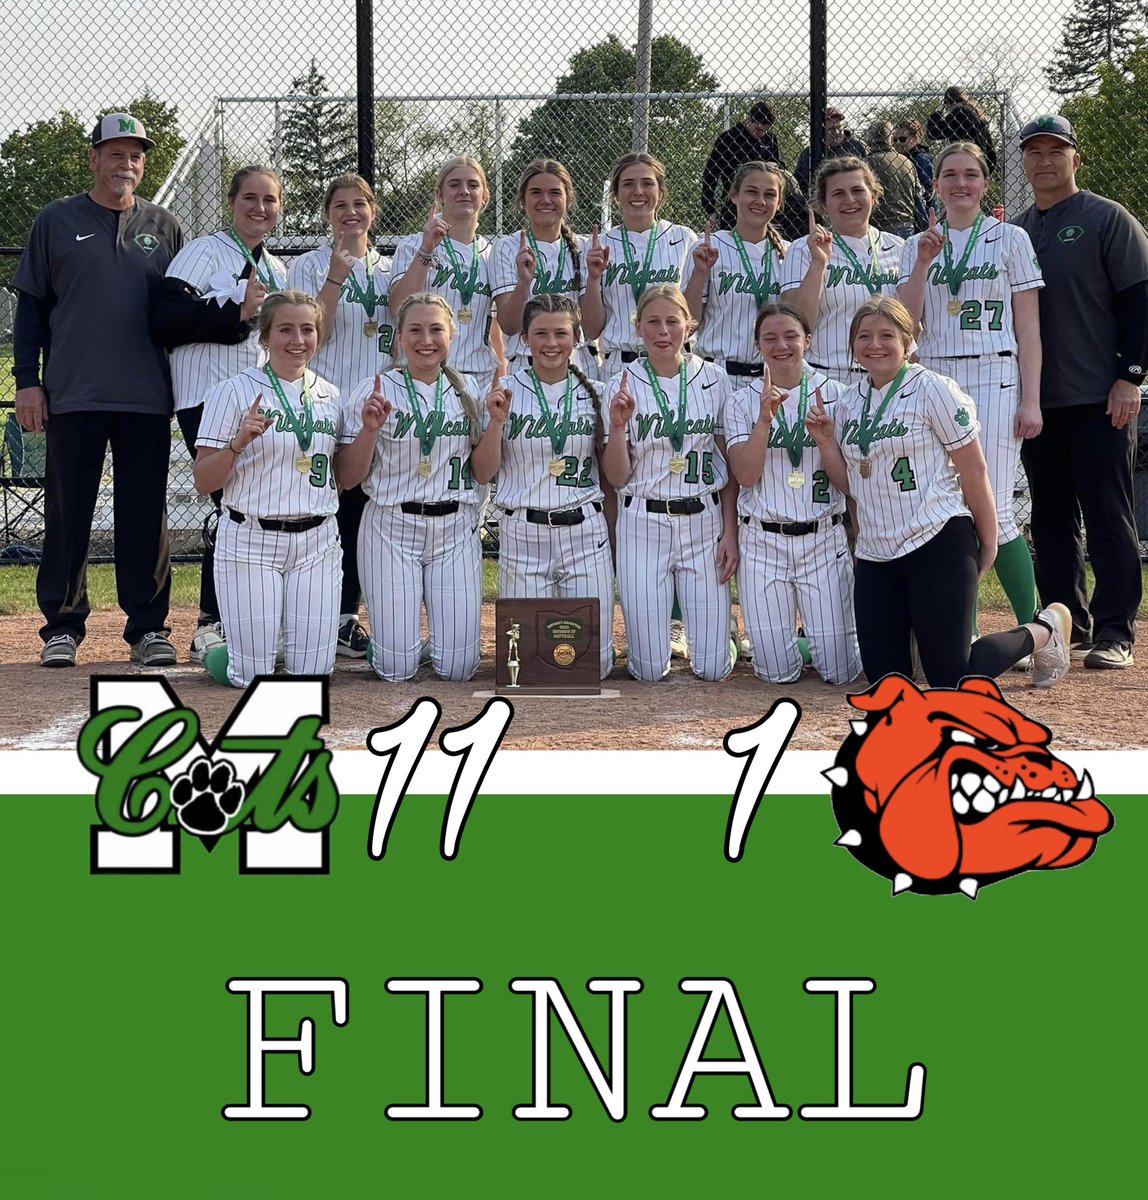 District champion Mogadore Wildcats has a nice ring to it,

But we're not done yet. #GoCats🐾